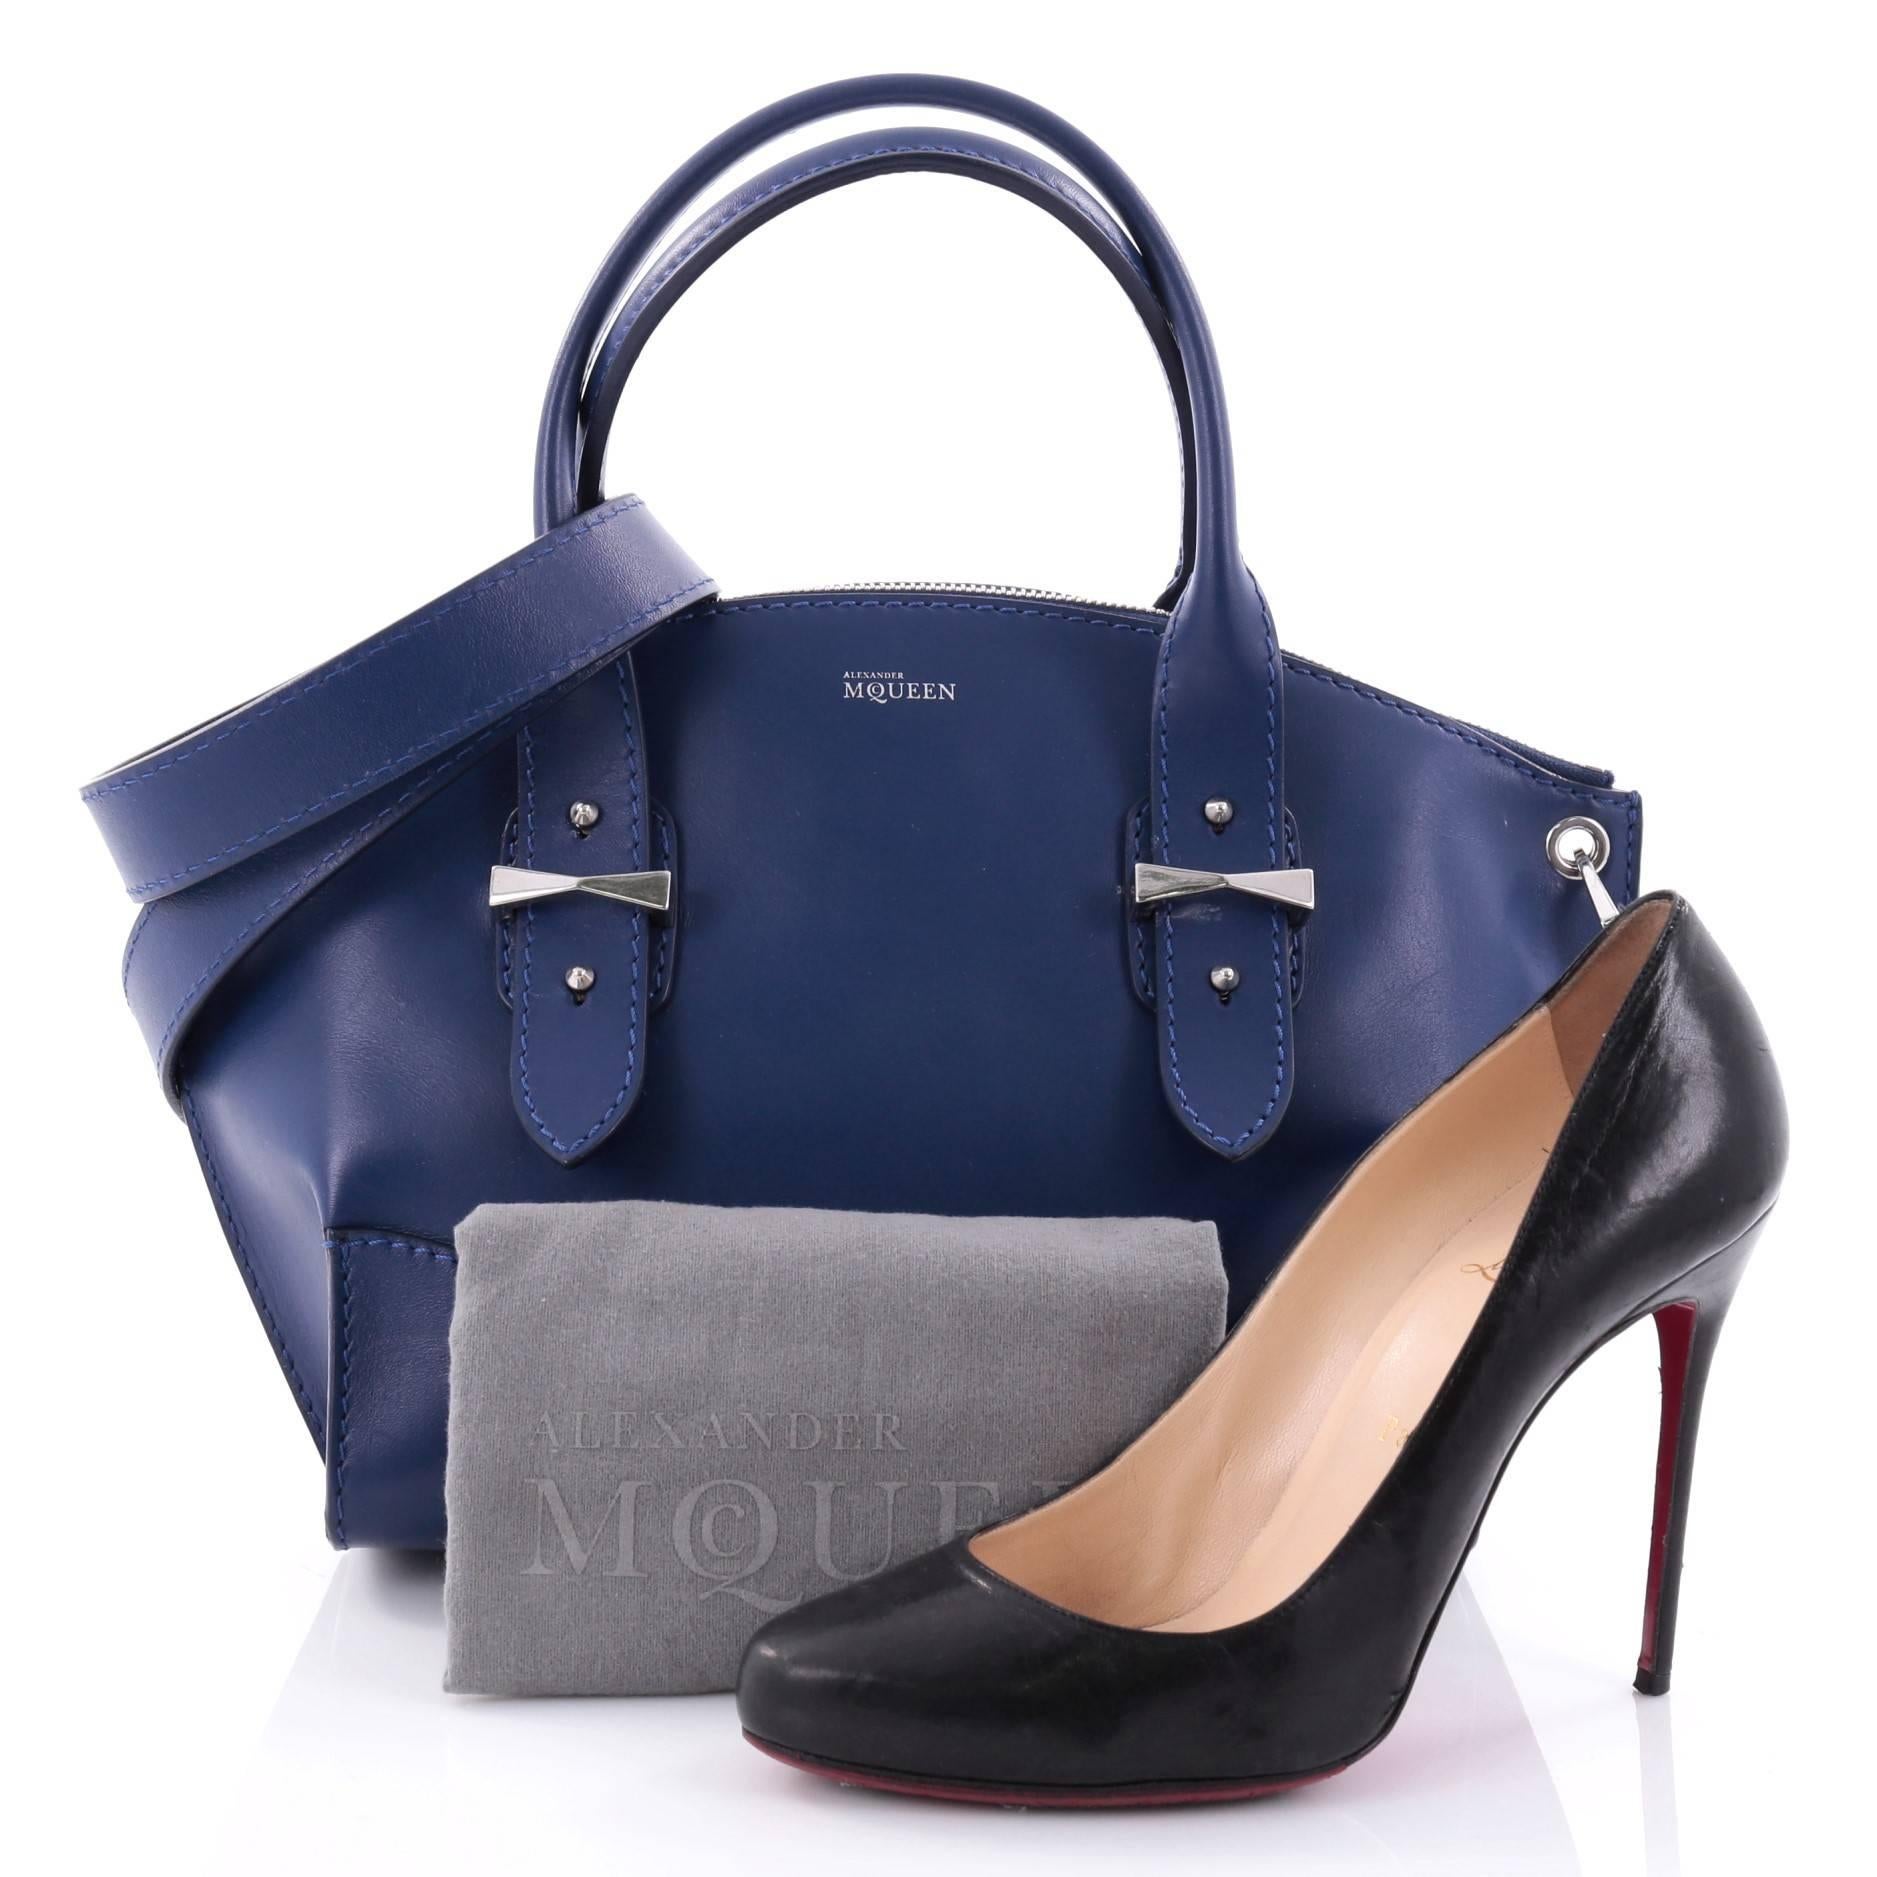 This authentic Alexander McQueen Legend Convertible Satchel Leather Small is a sure-fire hit for the new season, destined to become your forever bag. Crafted from blue leather, this sophisticated bag features dual-rolled leather handles, detachable